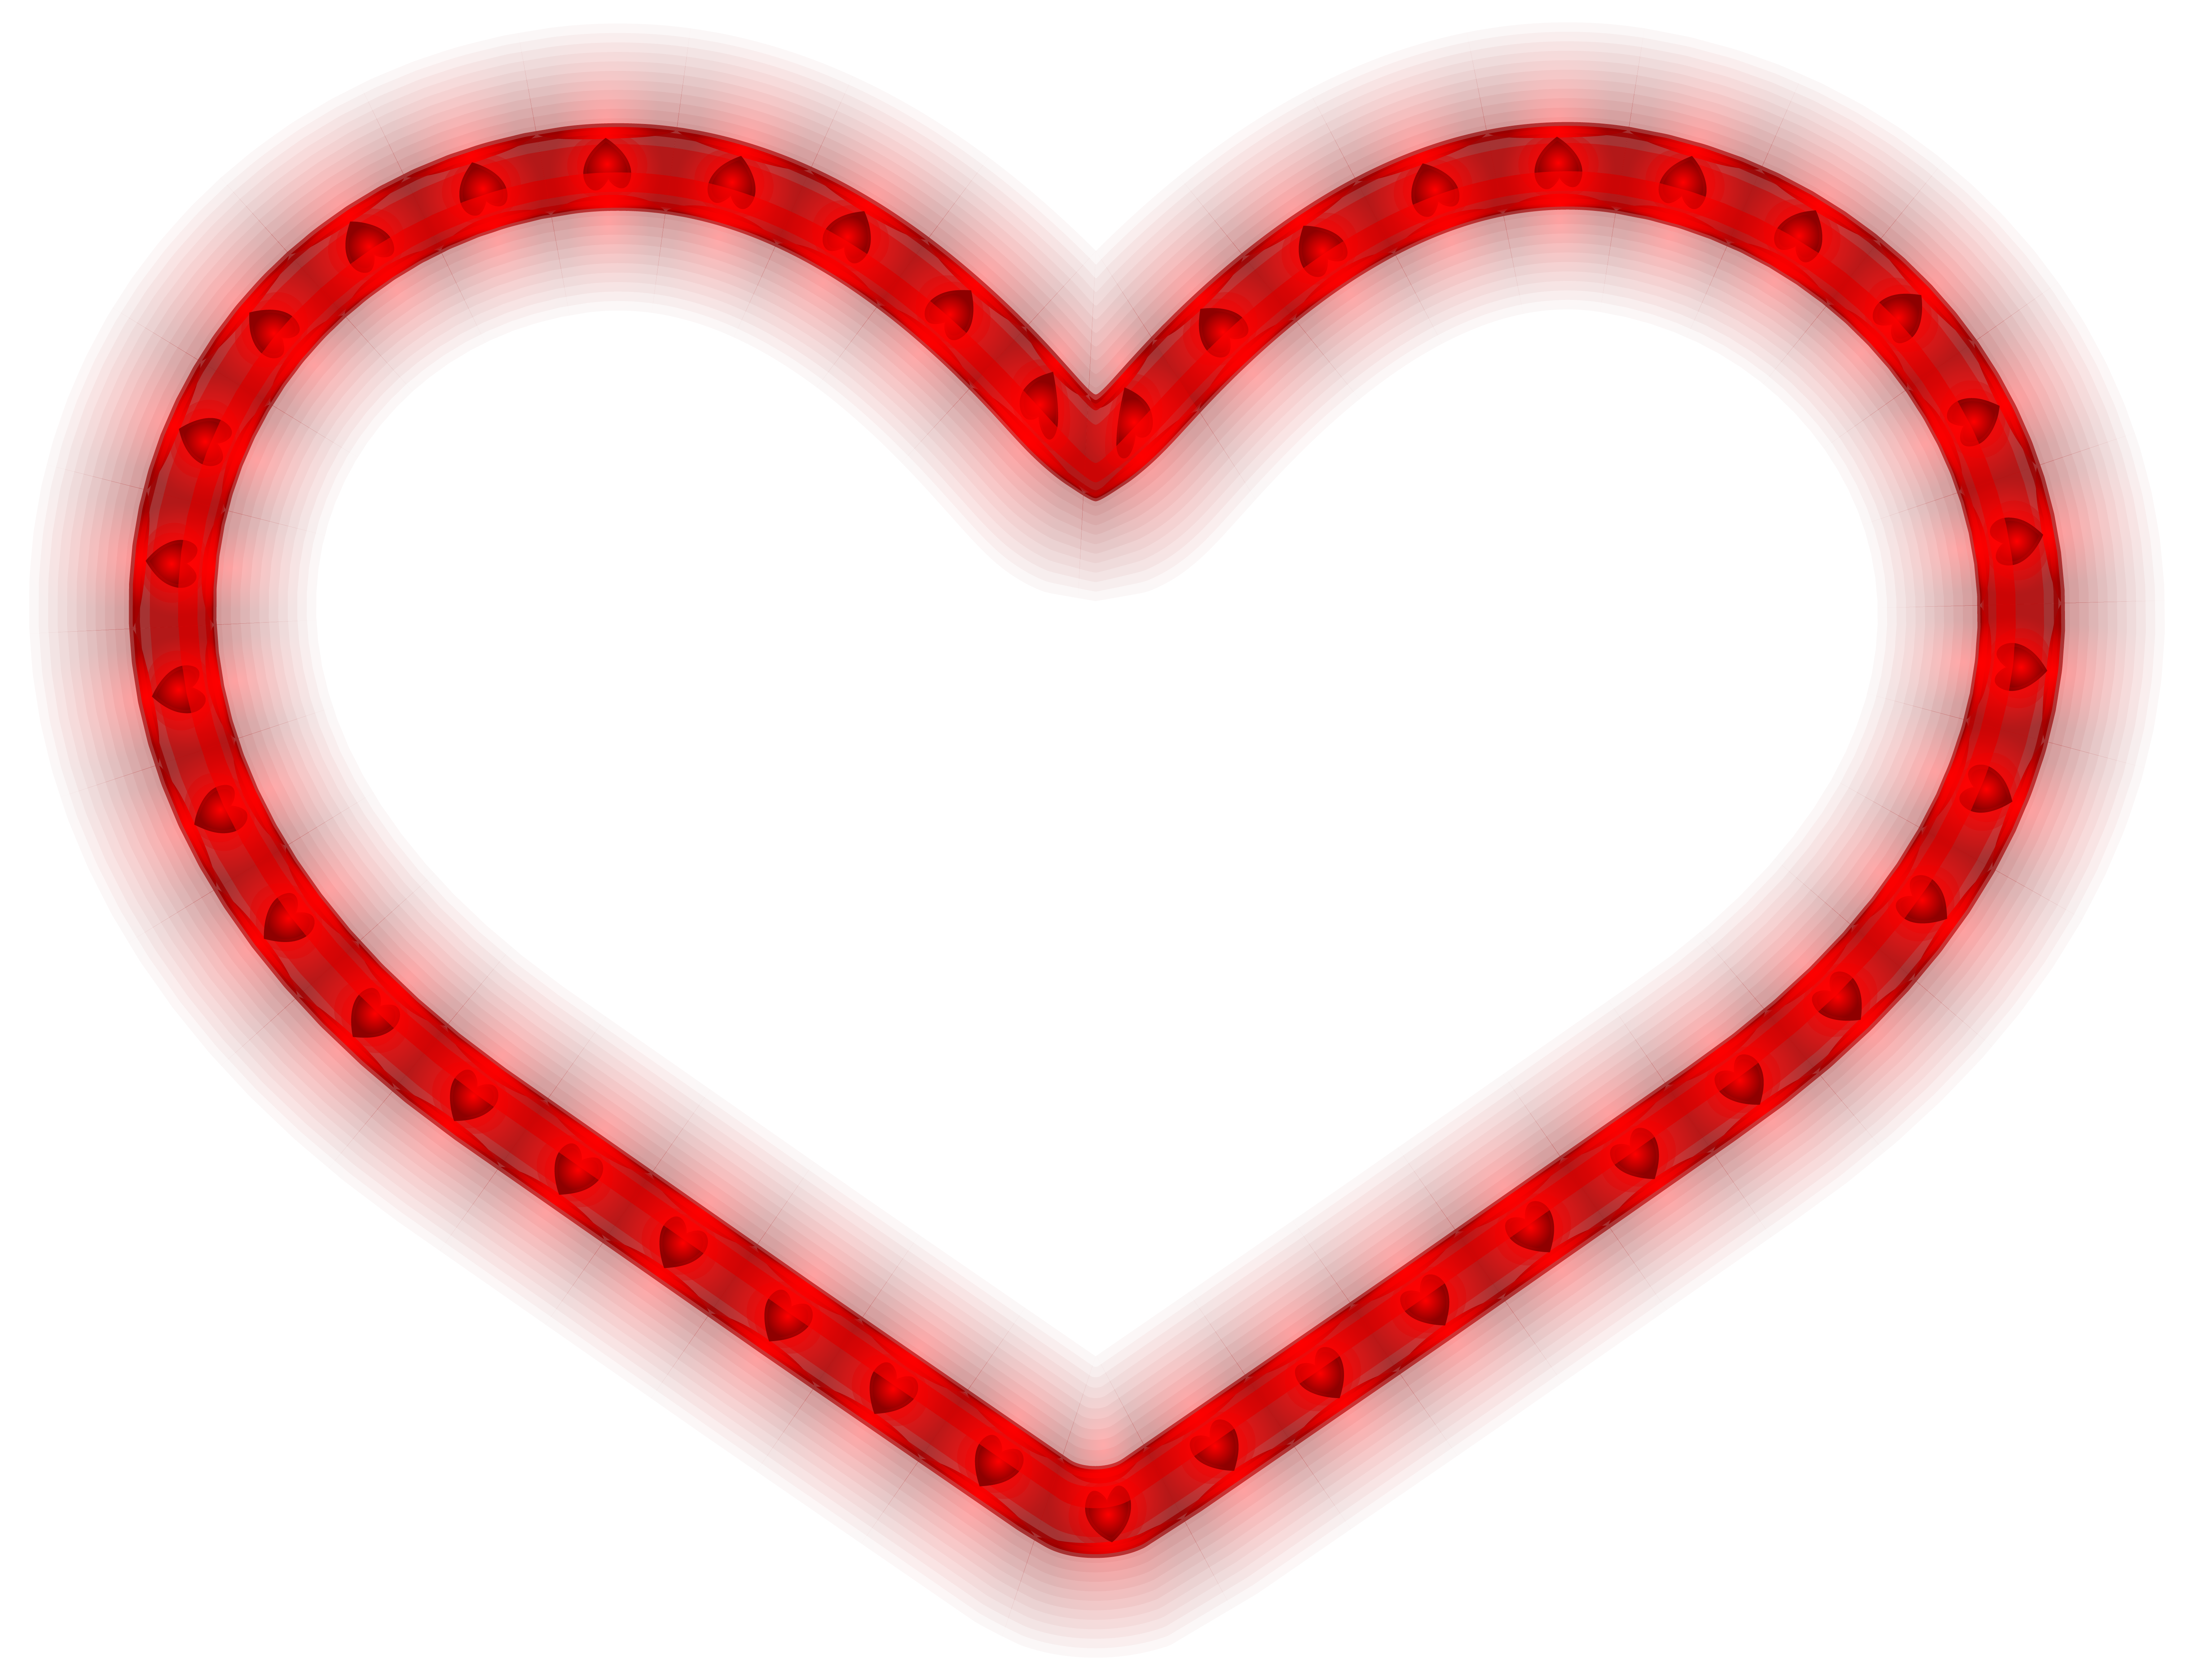 Red Heart Love PNG Pic